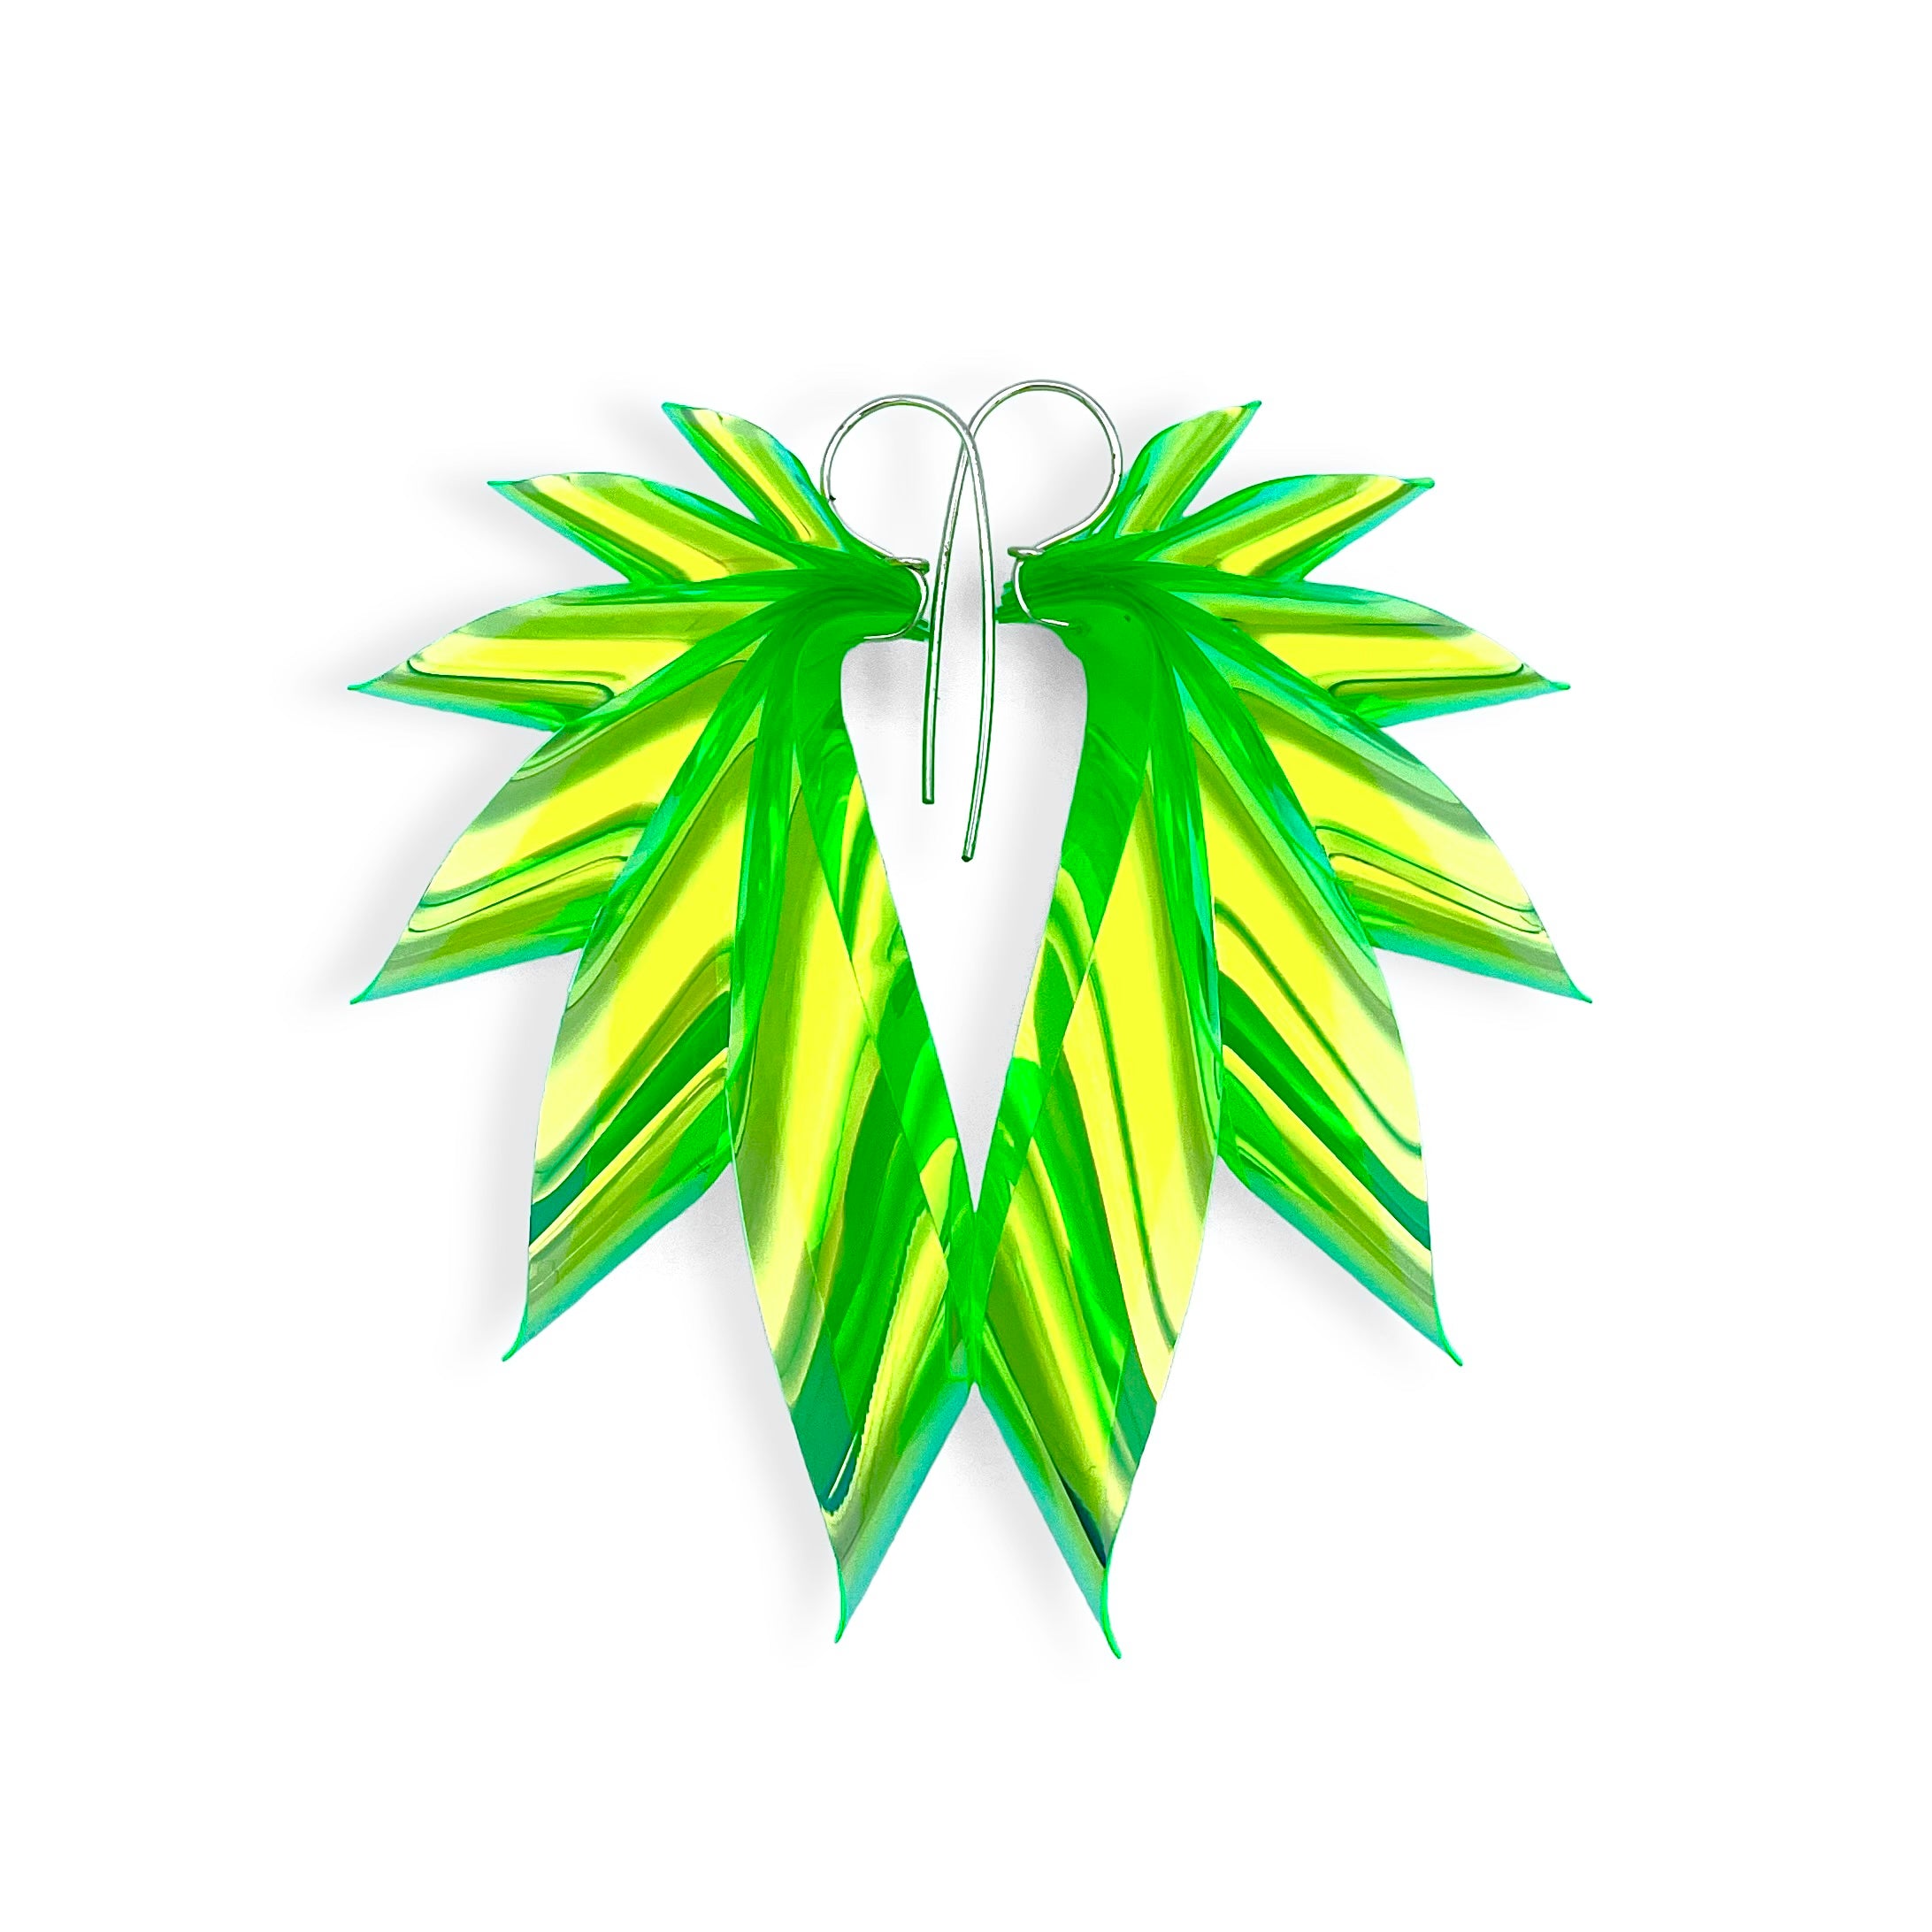 The Wings neon green by Fossdal